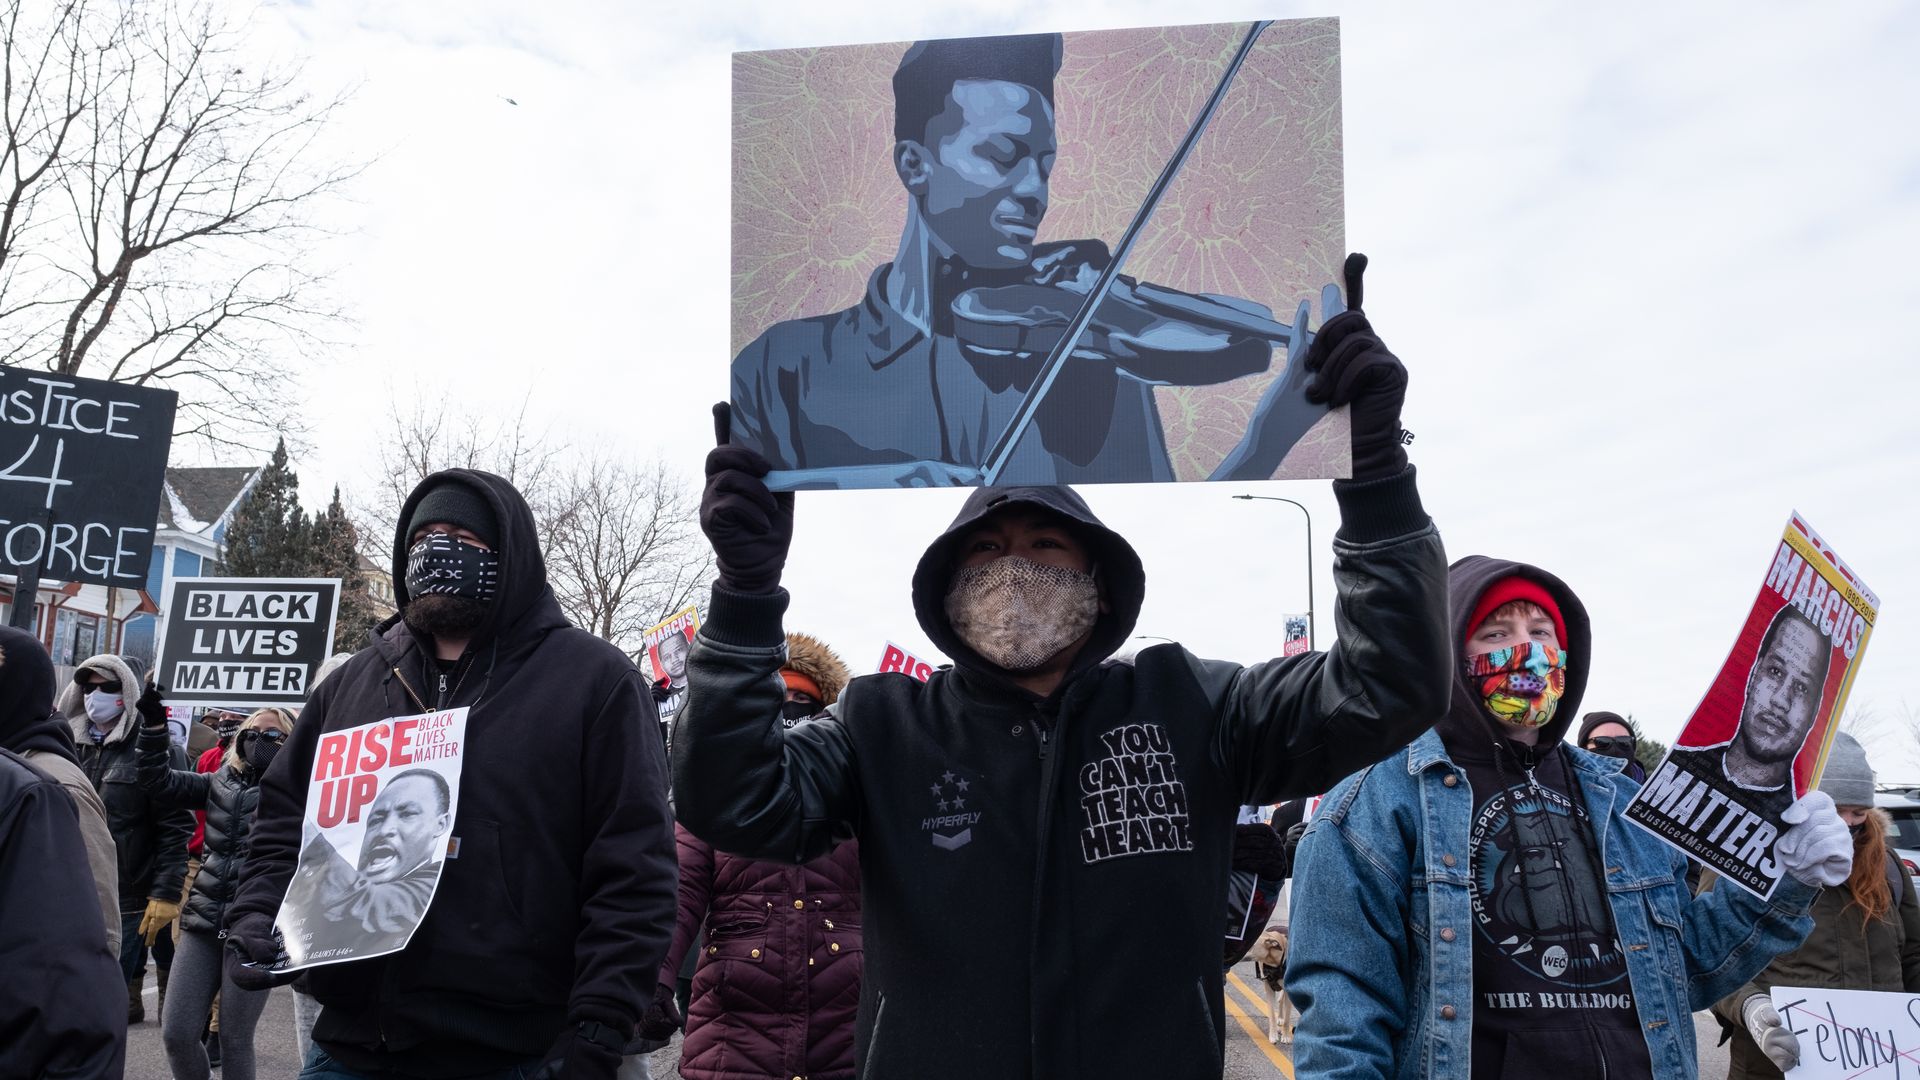 A protester holds a poster of Elijah McClain during a Martin Luther King Jr. Day march in St. Paul. January 18, 2021. (Photo by Tim Evans/NurPhoto via Getty Images)